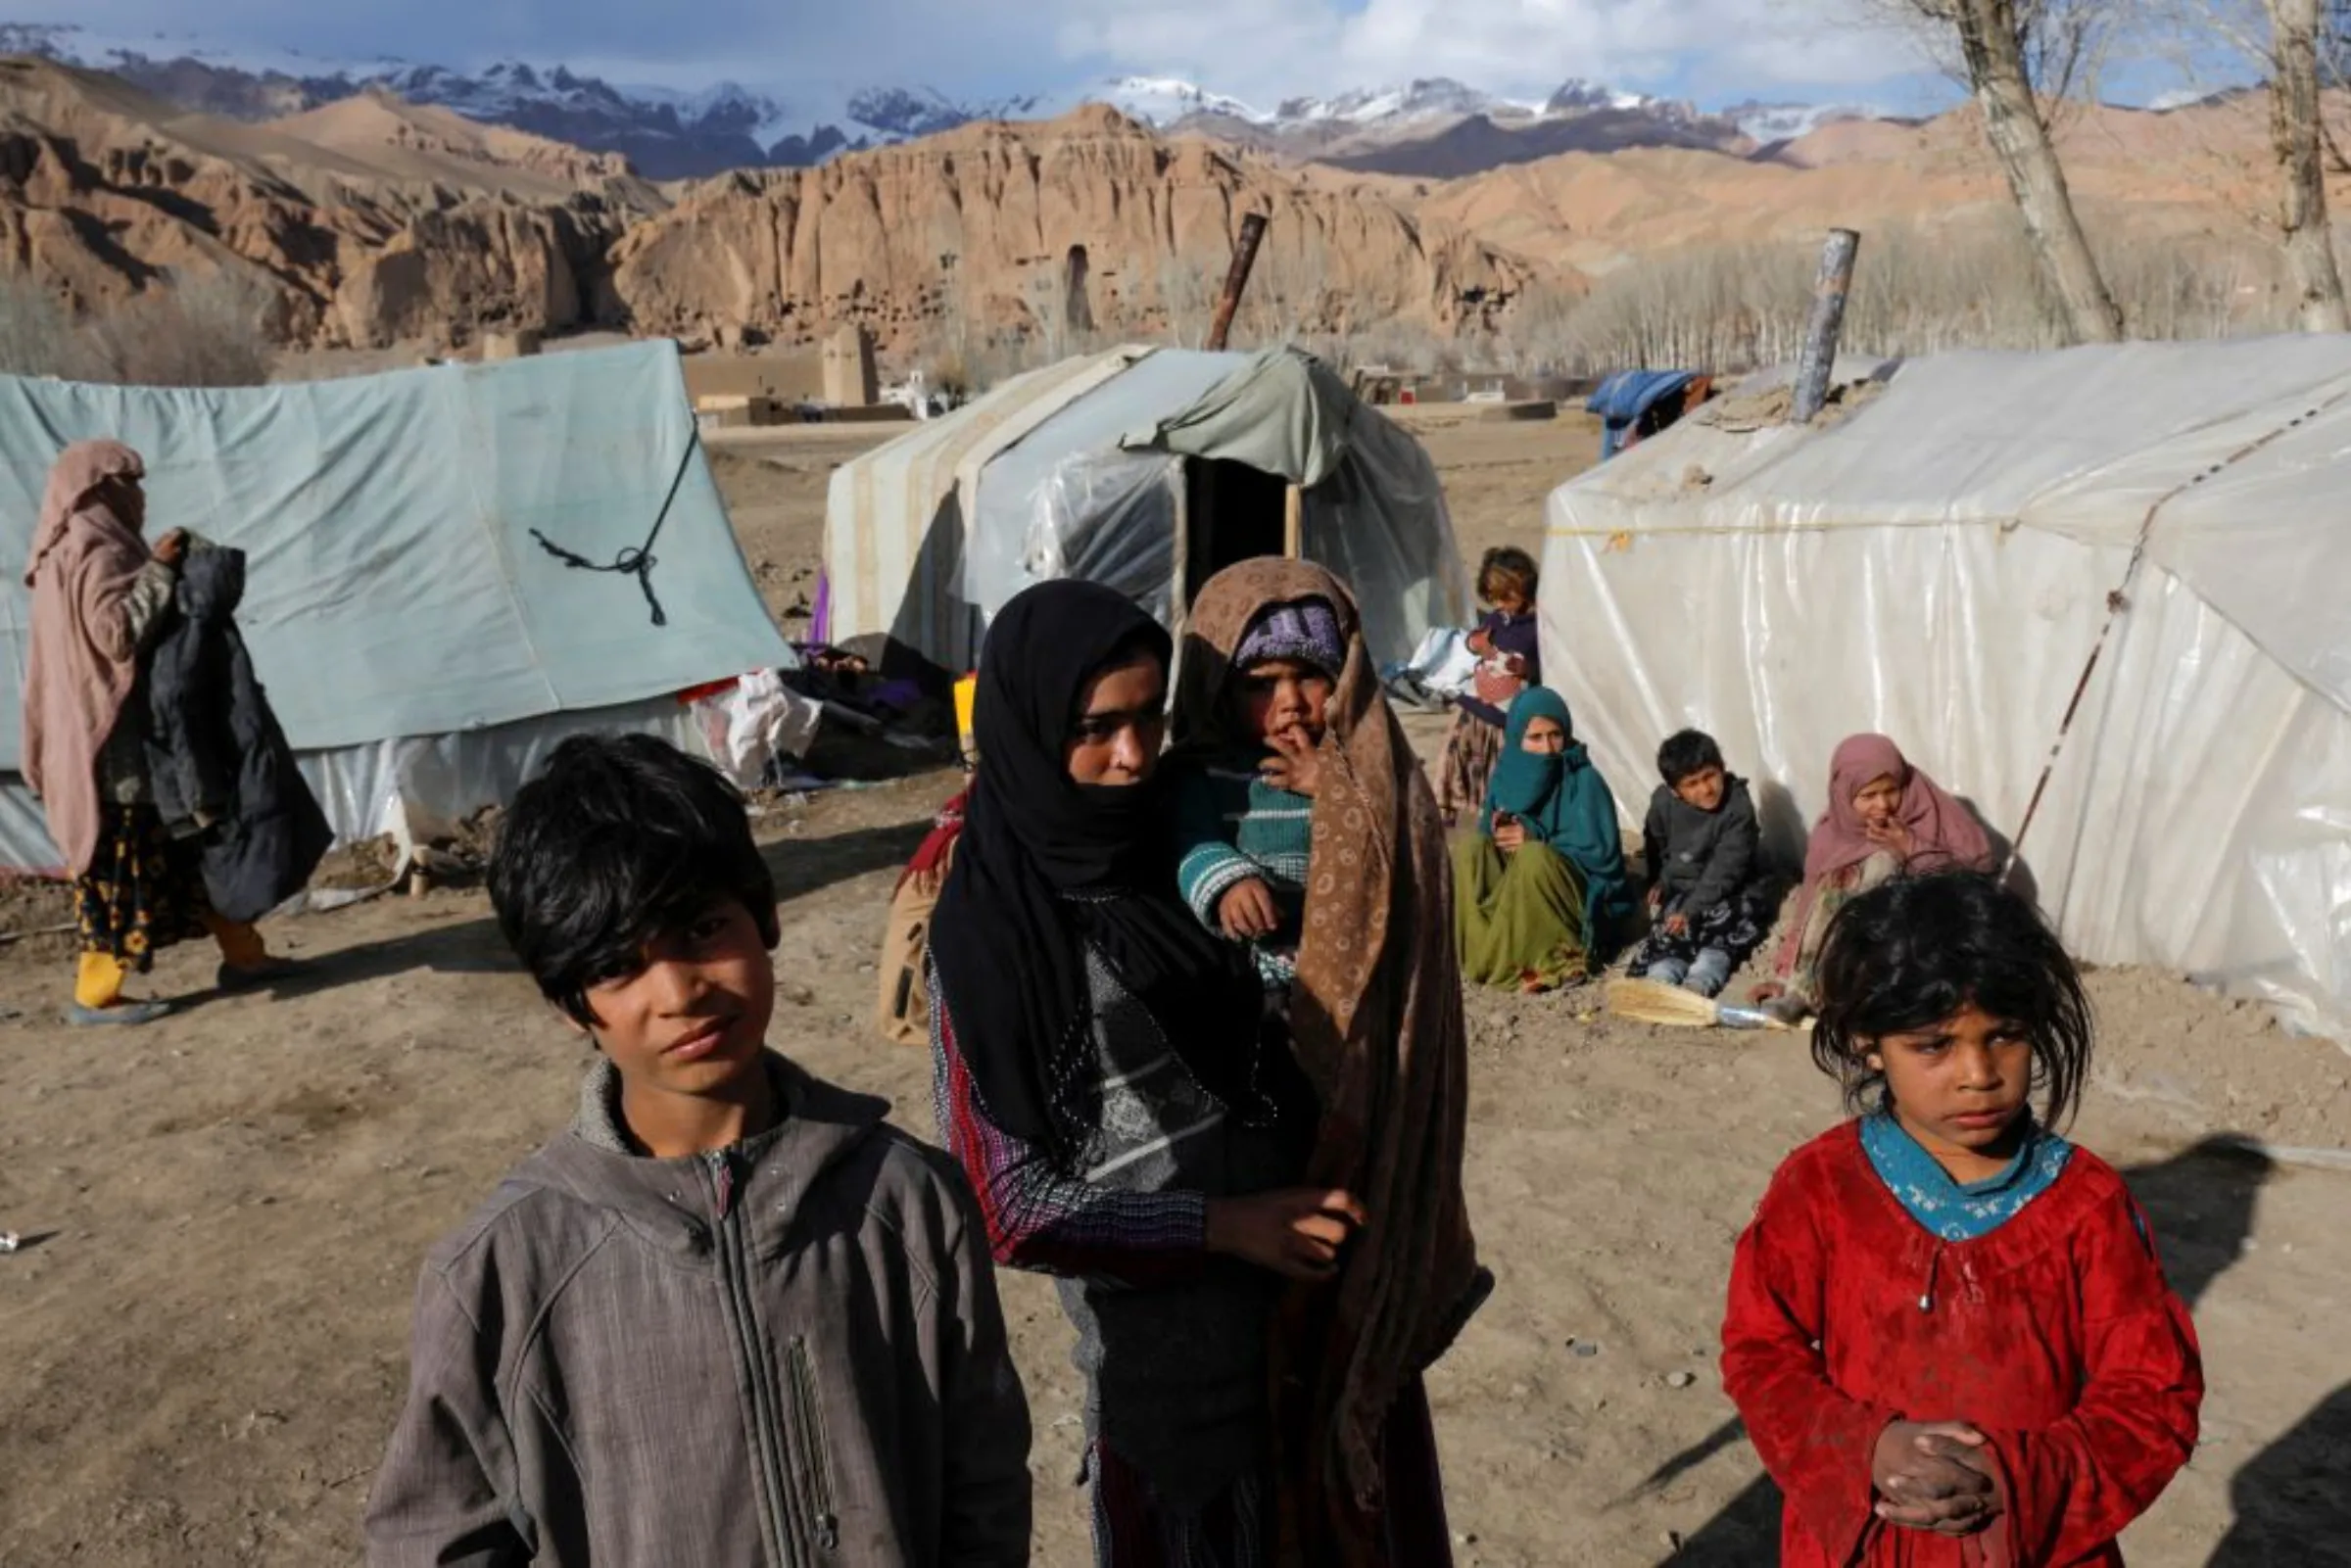 A displaced Afghan family from Kunduz province, whose house was destroyed by flood, lives in an open area in front of the ruins of a 1500-year-old Buddha statue, in Bamiyan, Afghanistan, March 2, 2023